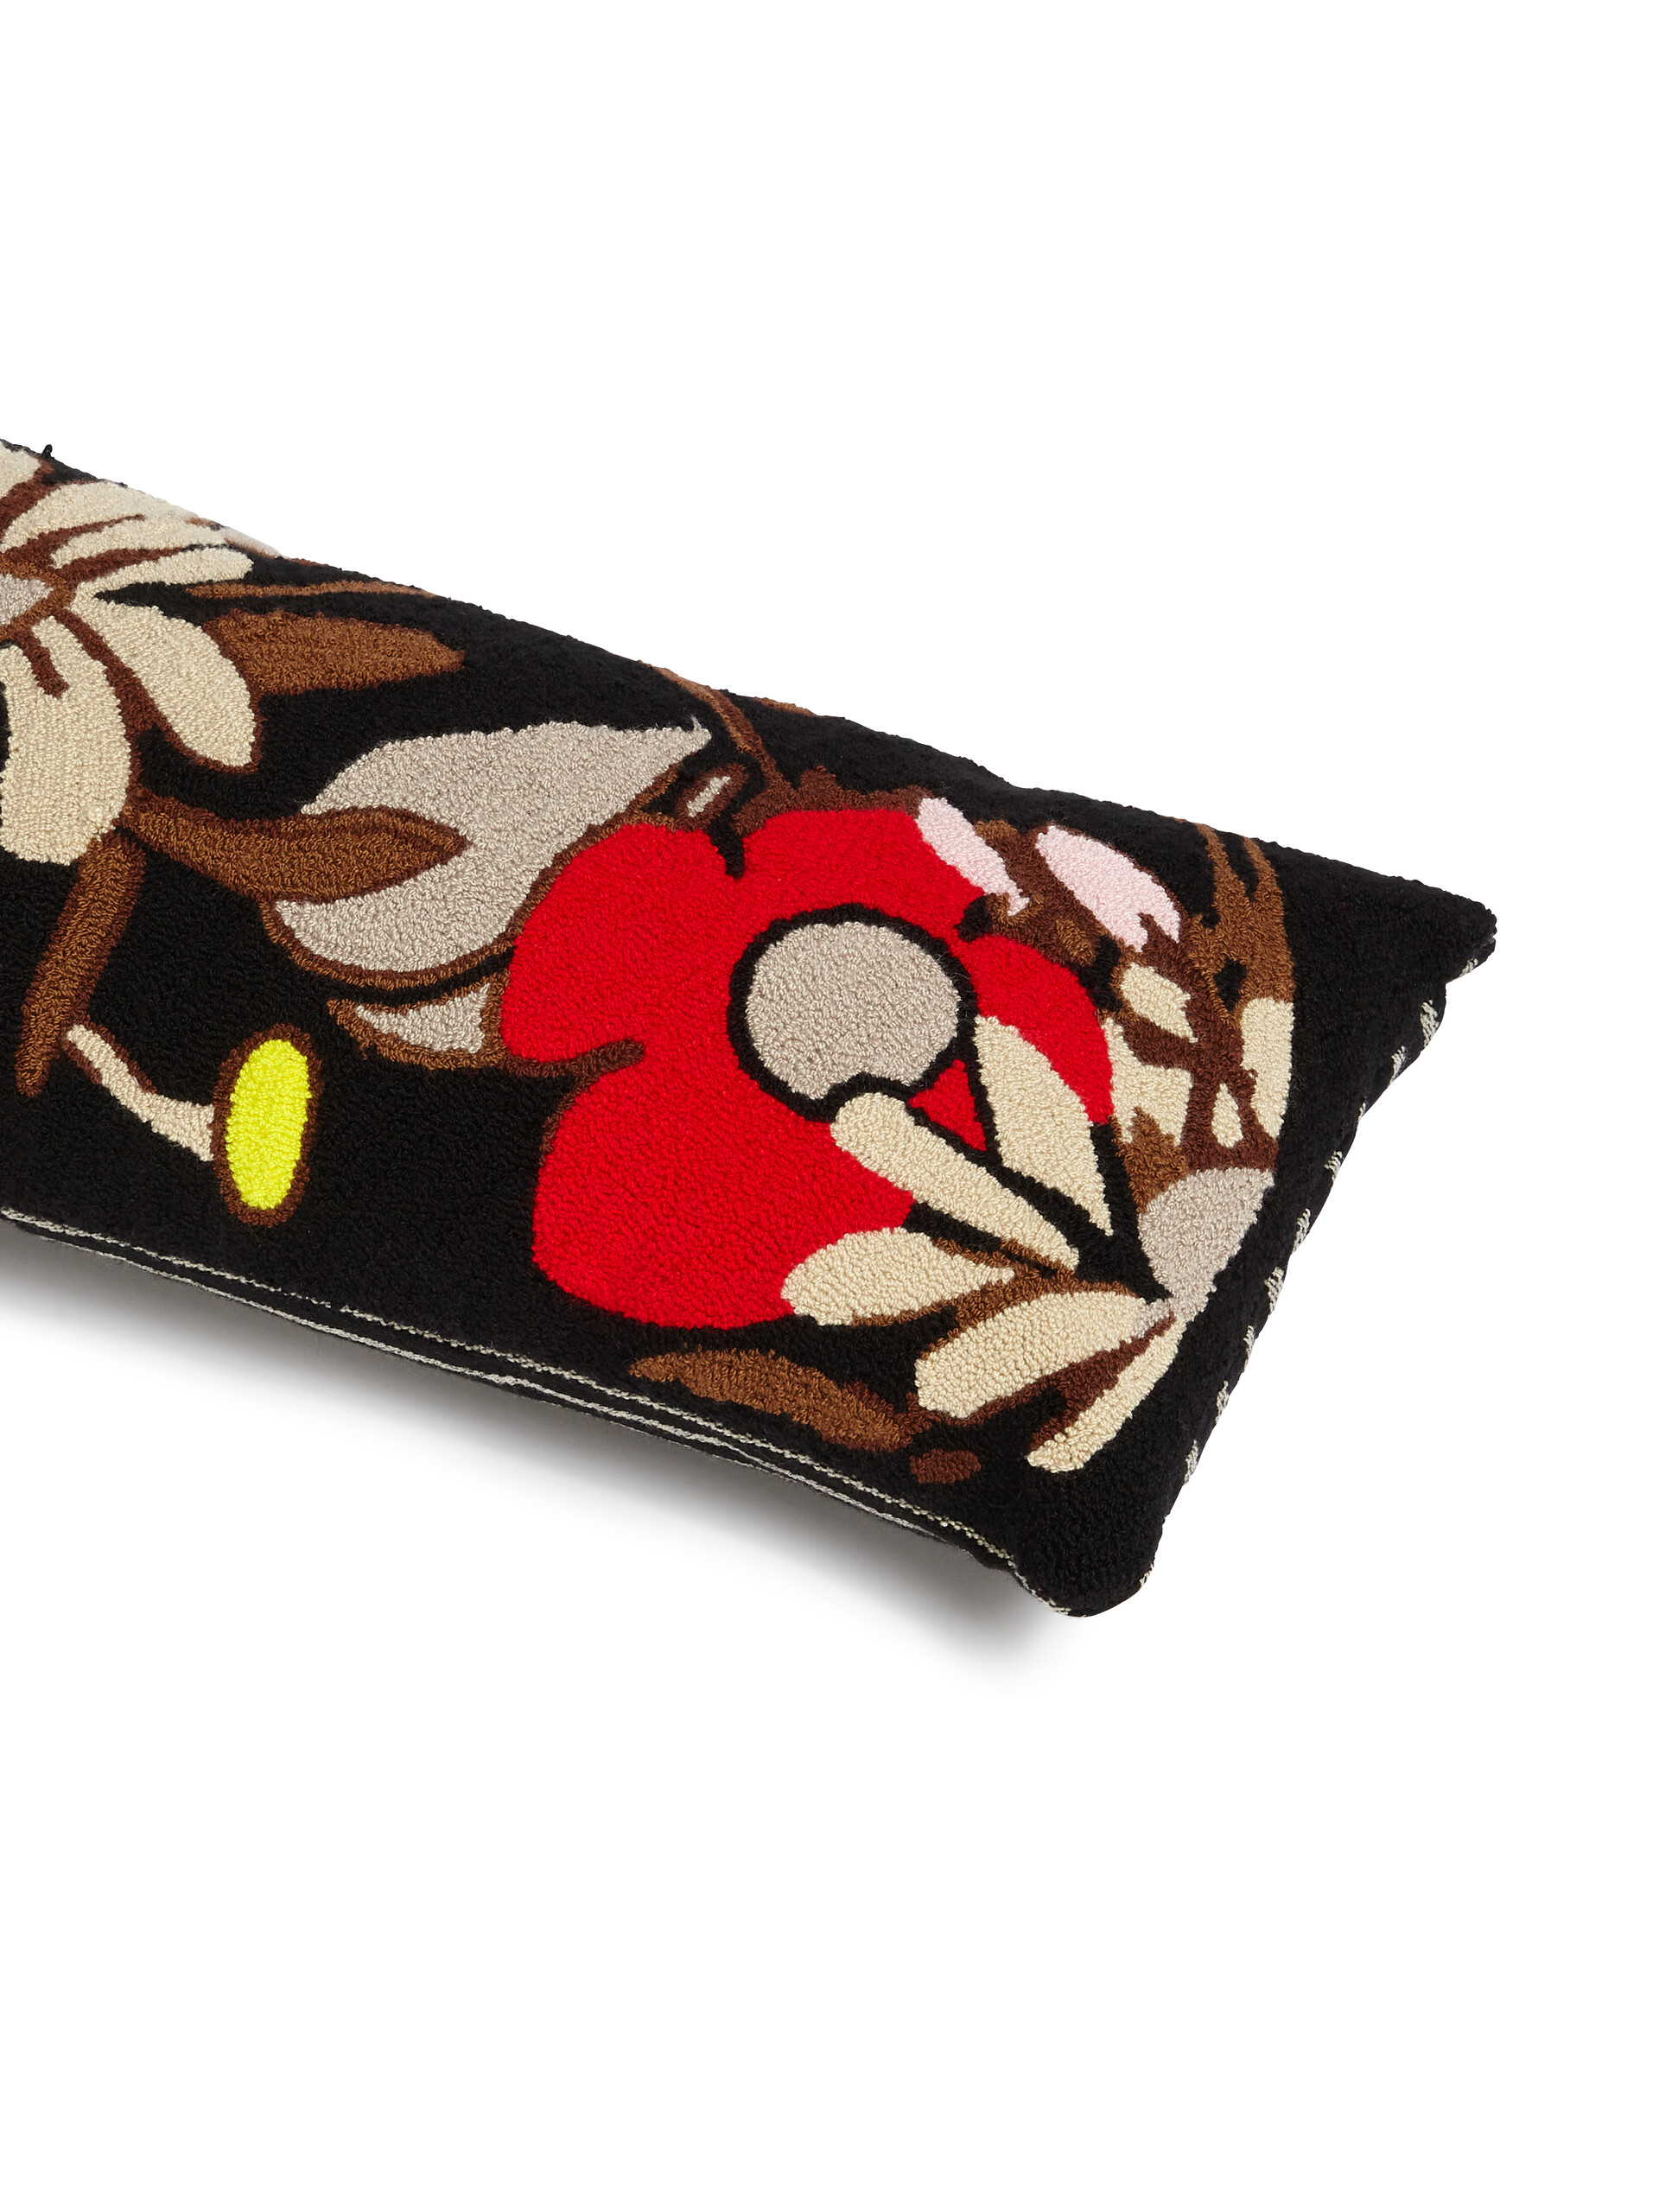 MARNI MARKET cushion in black fabric with flower motif - Furniture - Image 3